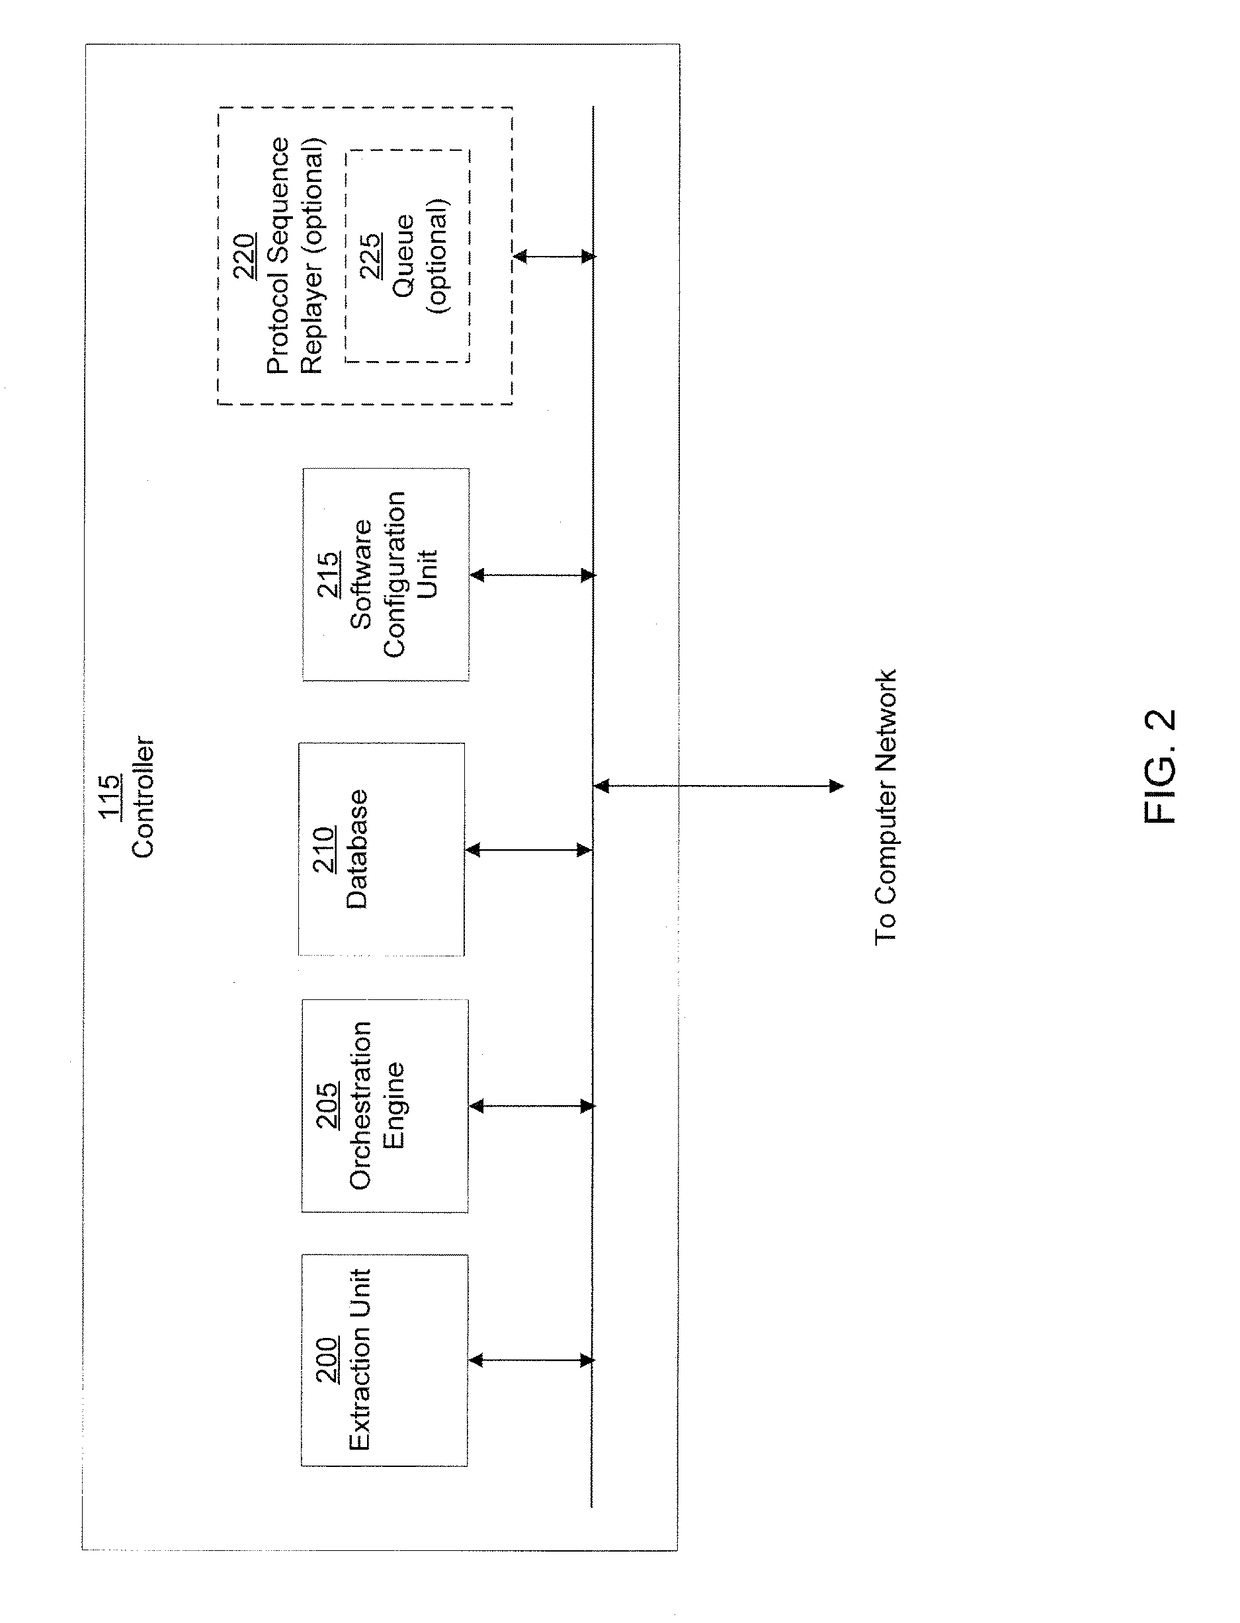 System and method of detecting malicious content